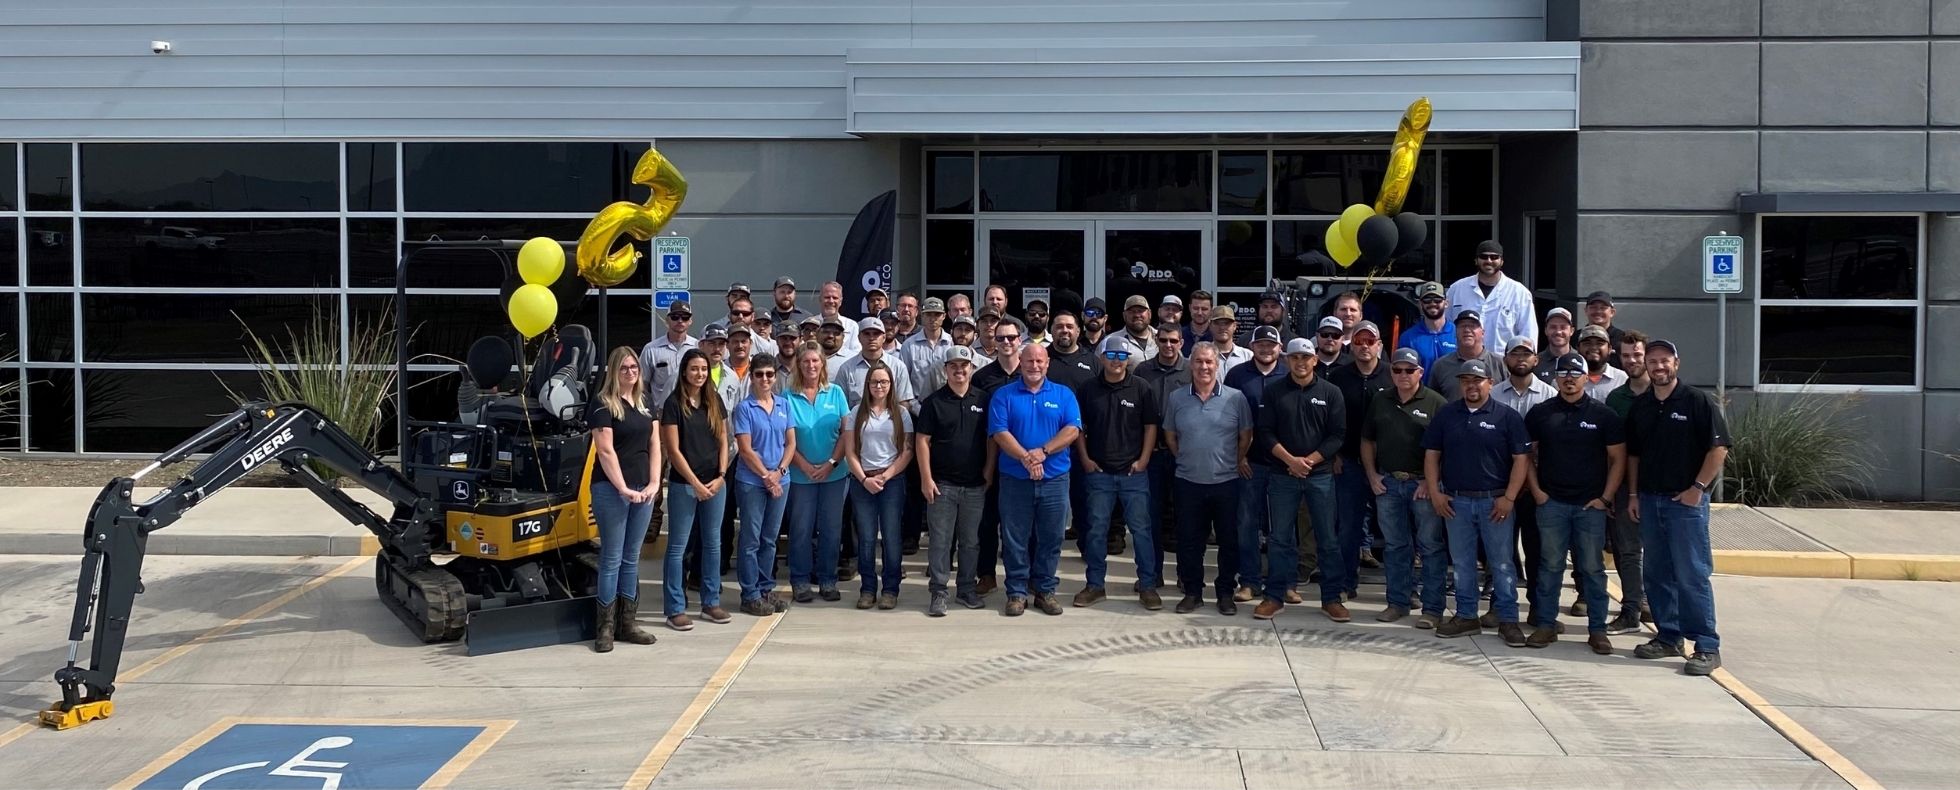 RDO Equipment Co. – Chandler Celebrates 5 Years of Business